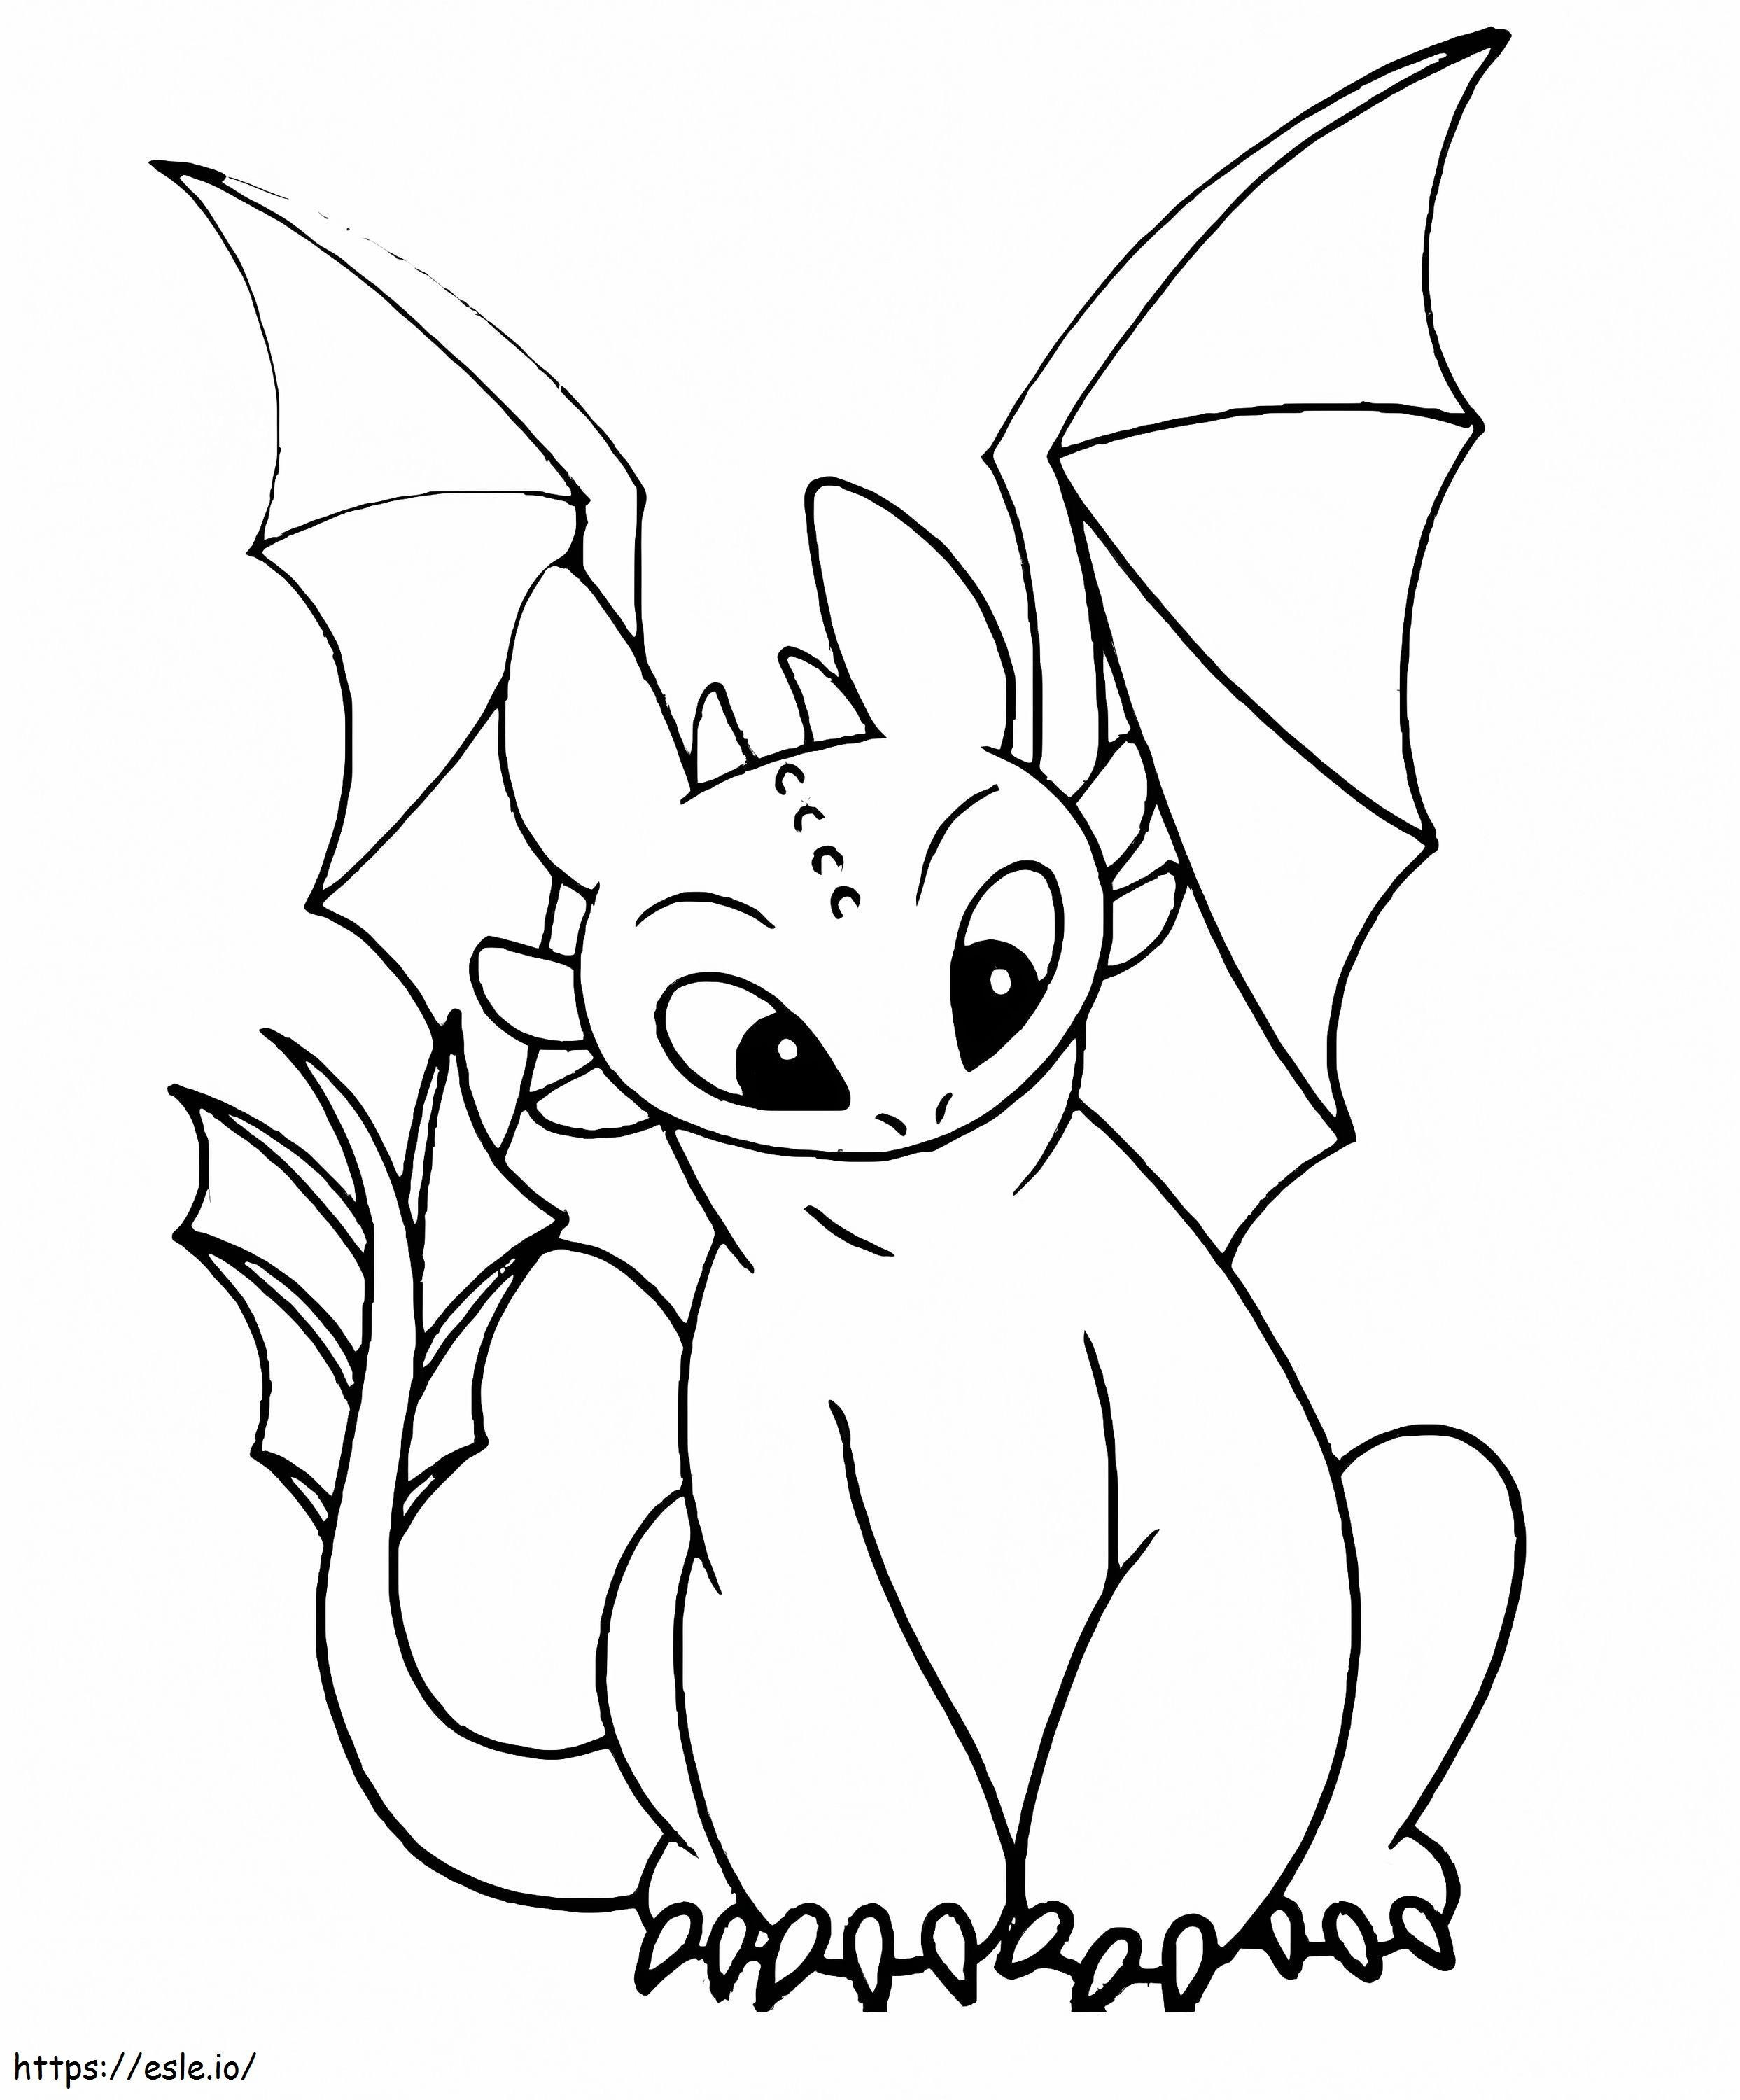 Curious Toothless coloring page